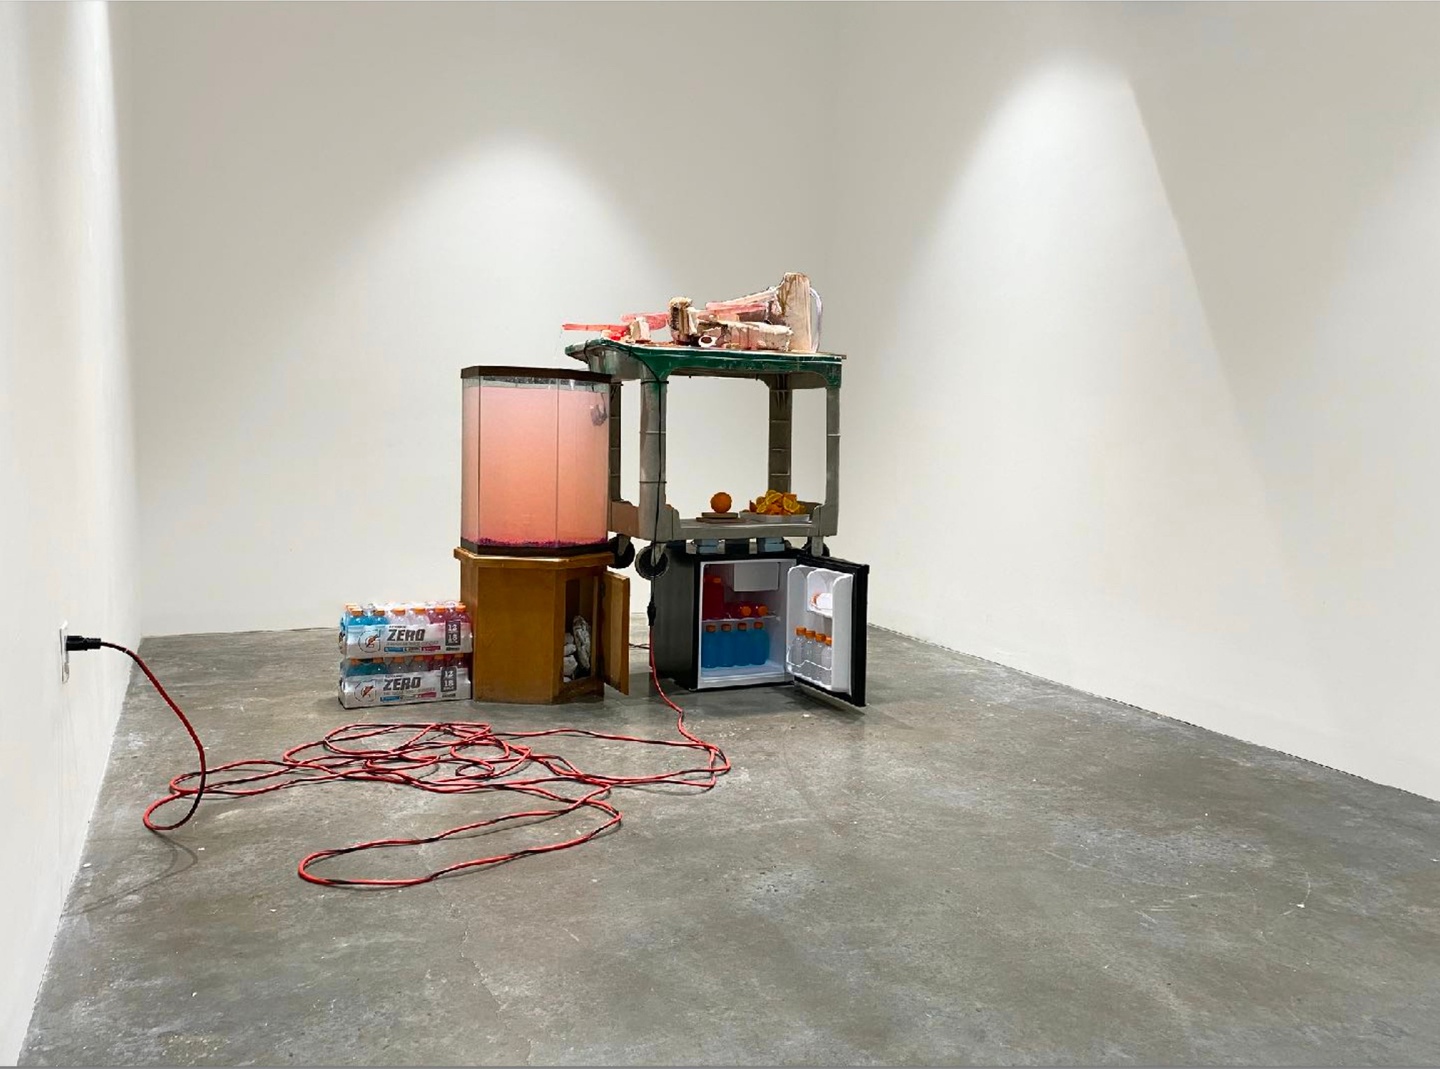 Mixed media sculpture featuring a mini-fridge plugged into a wall, filled with bottles of Gatorade; a cart is stacked on top, with oranges and clay on top. A wooden cabinet, door slightly ajar, with a clear cooler of red liquid are to the left, along with two small containers of Gatorade bottles.